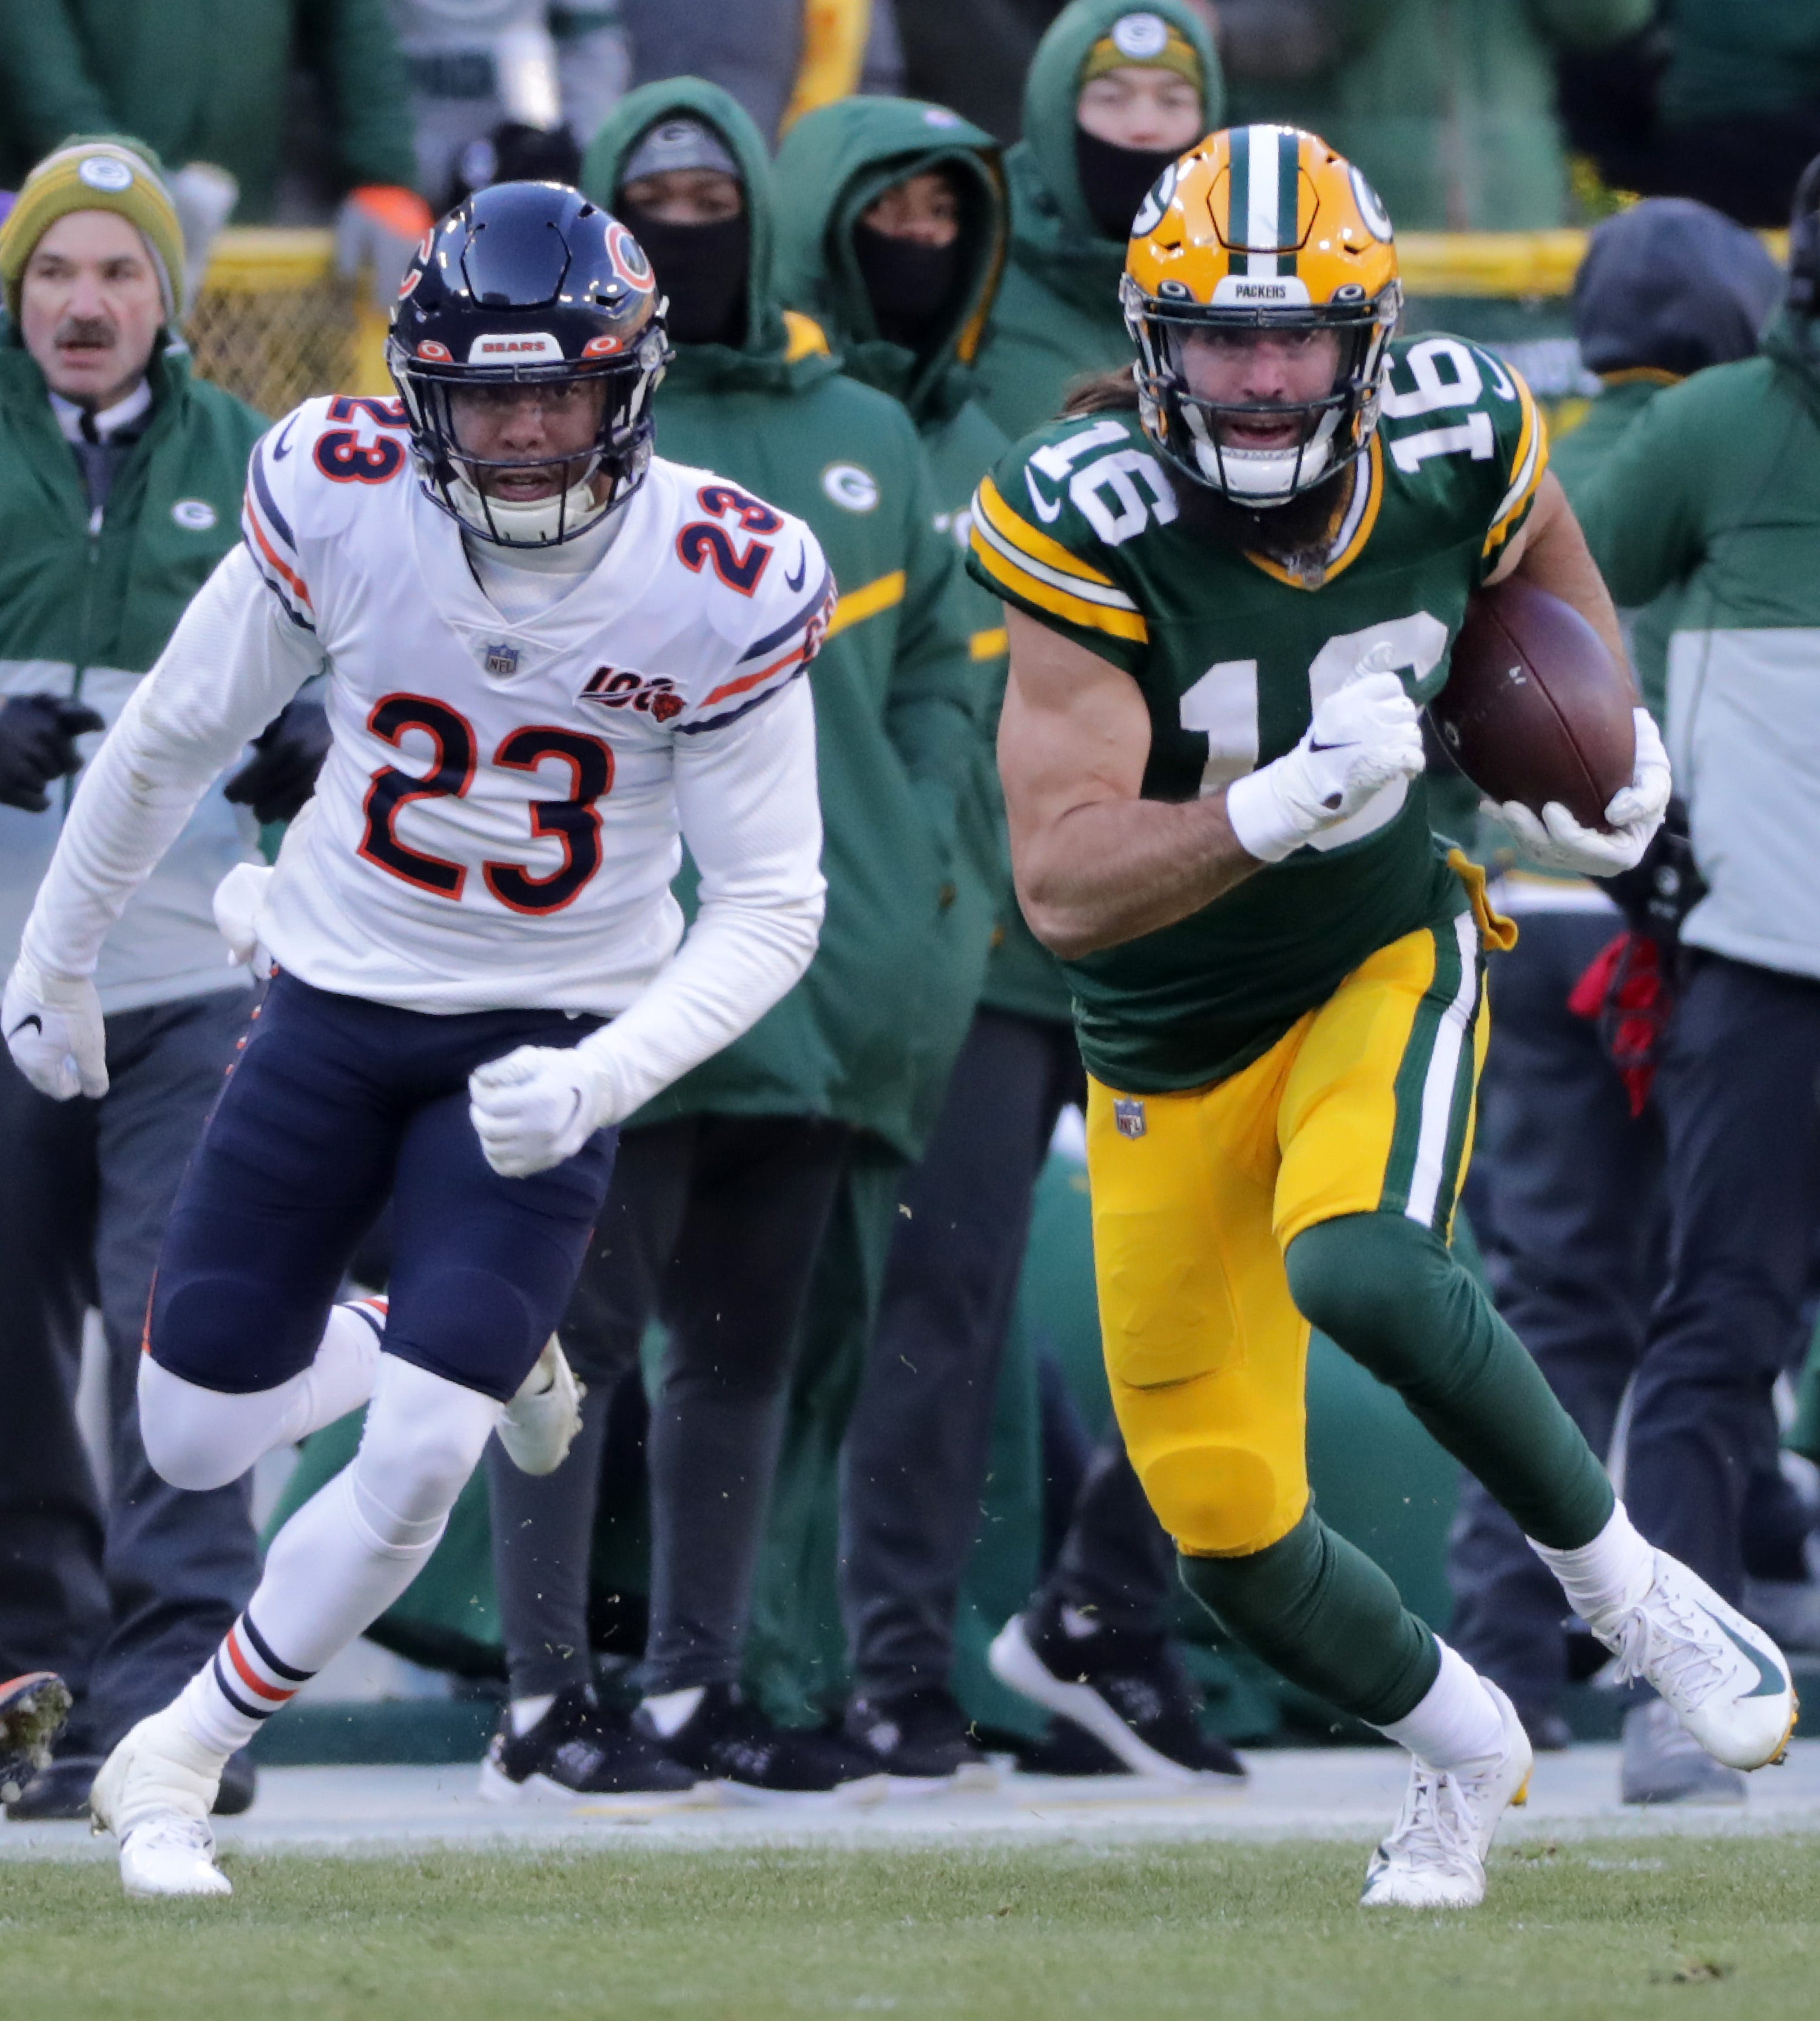 Green Bay Packers wide receiver Jake Kumerow (16) catches a pass against the Chicago Bears during their football game on Sunday, December 15, 2019, at Lambeau Field in Green Bay, Wis.